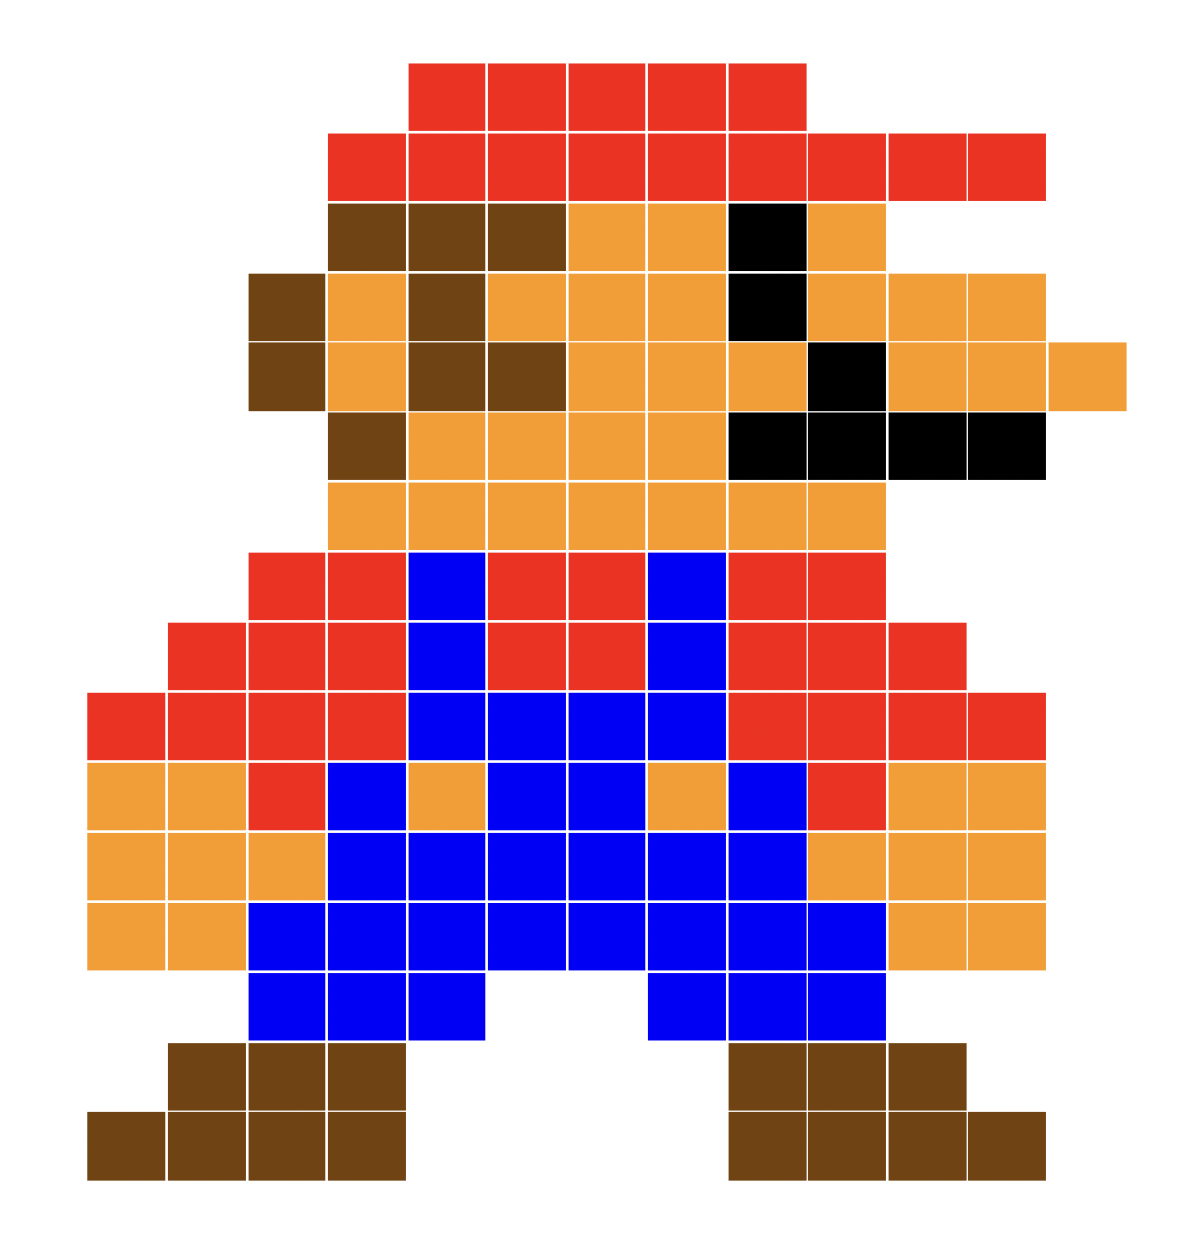 Outline of a person in blocks with a blue and red outfit, including a red hat.